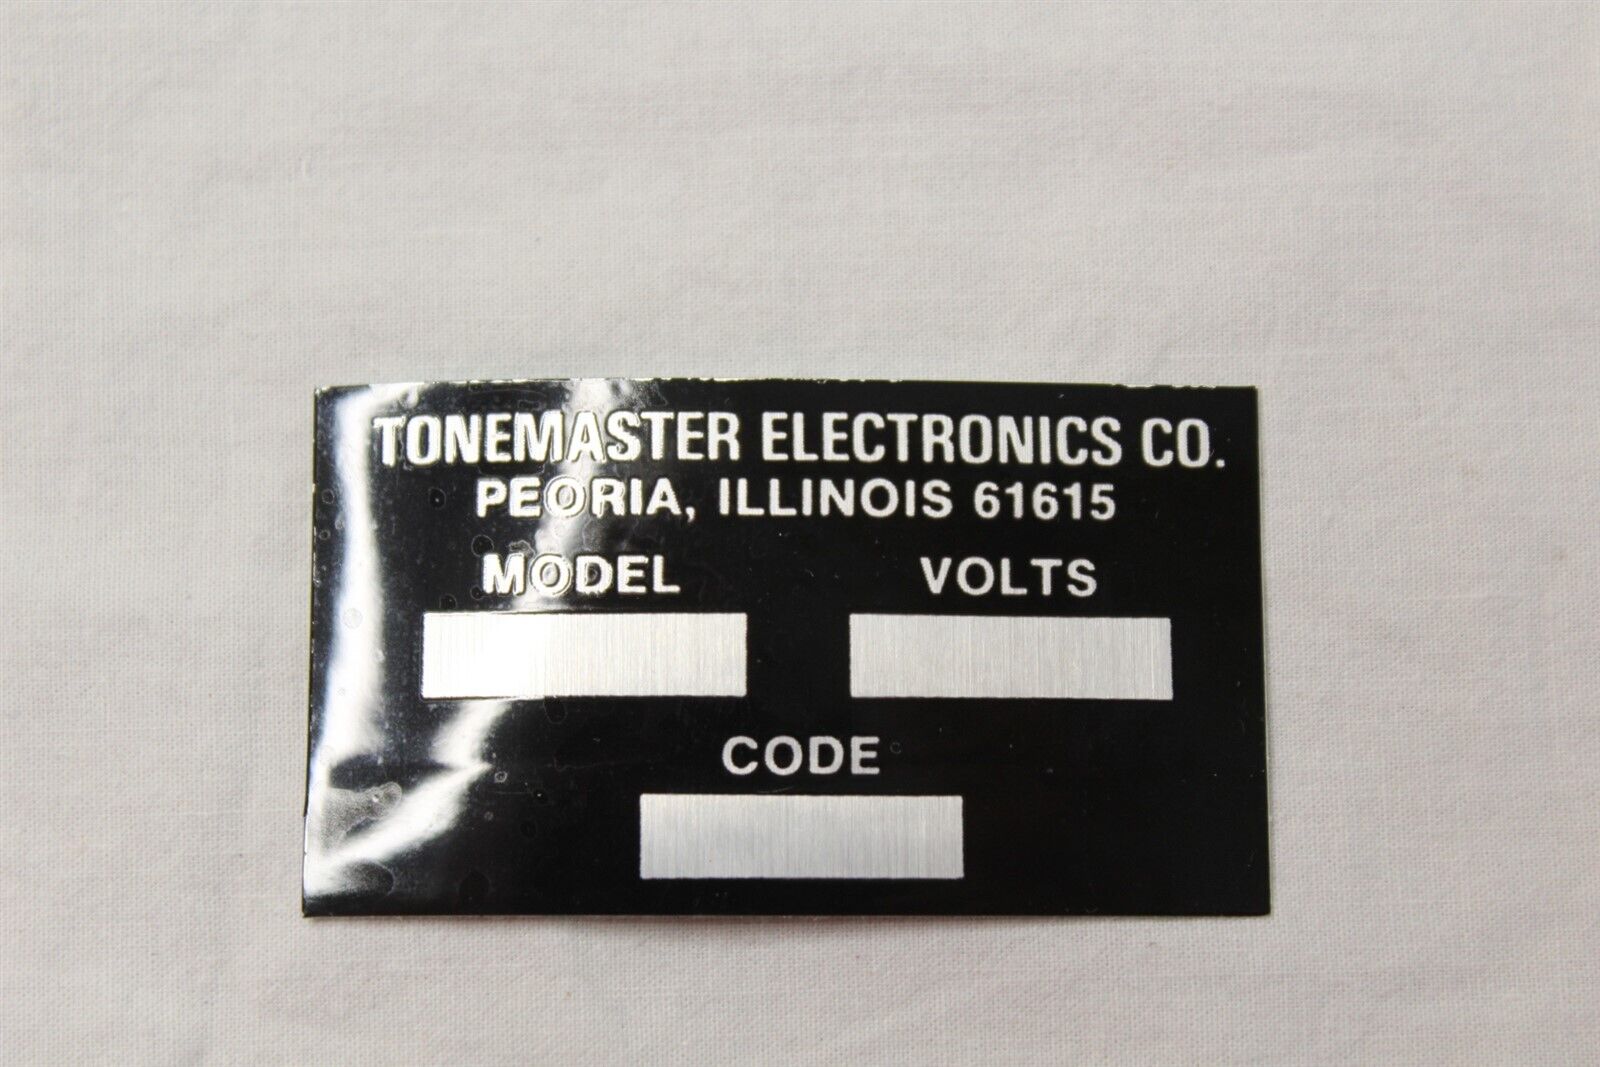  Sticker Badge Decal Label Advertising Tonemaster Electronics Co. Collectible